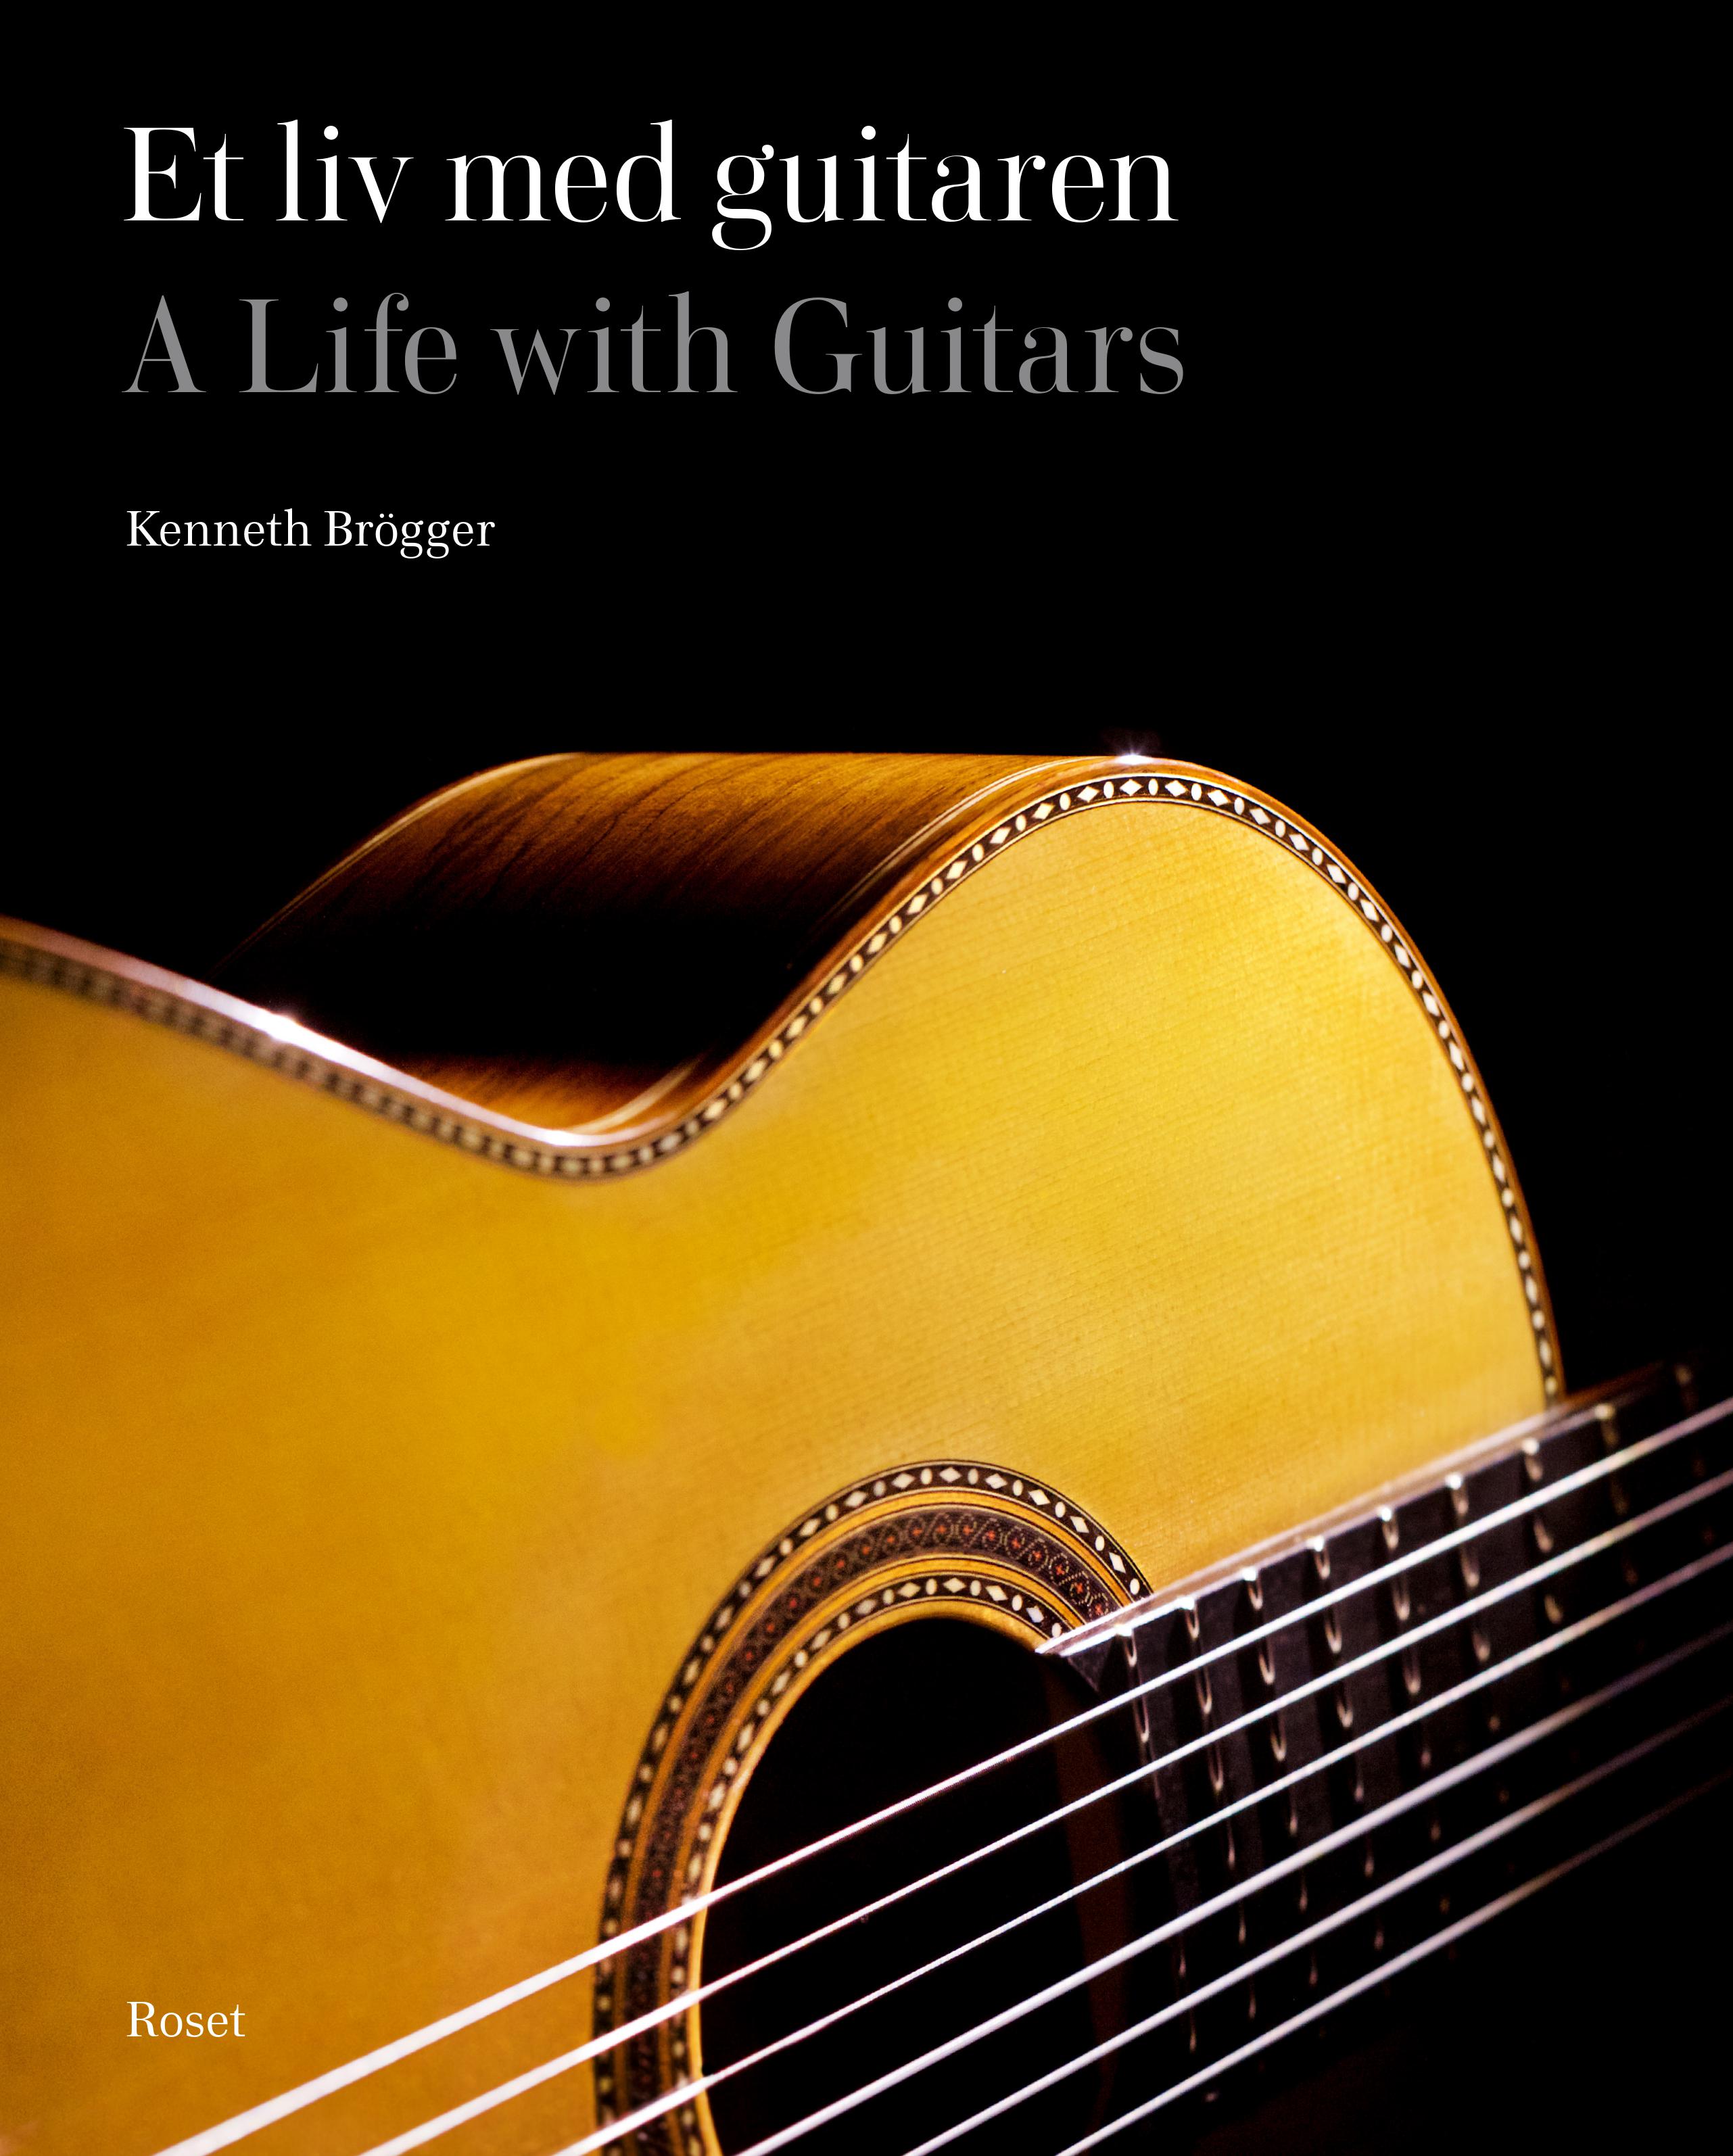 A Life With Guitars by Kenneth Brogger